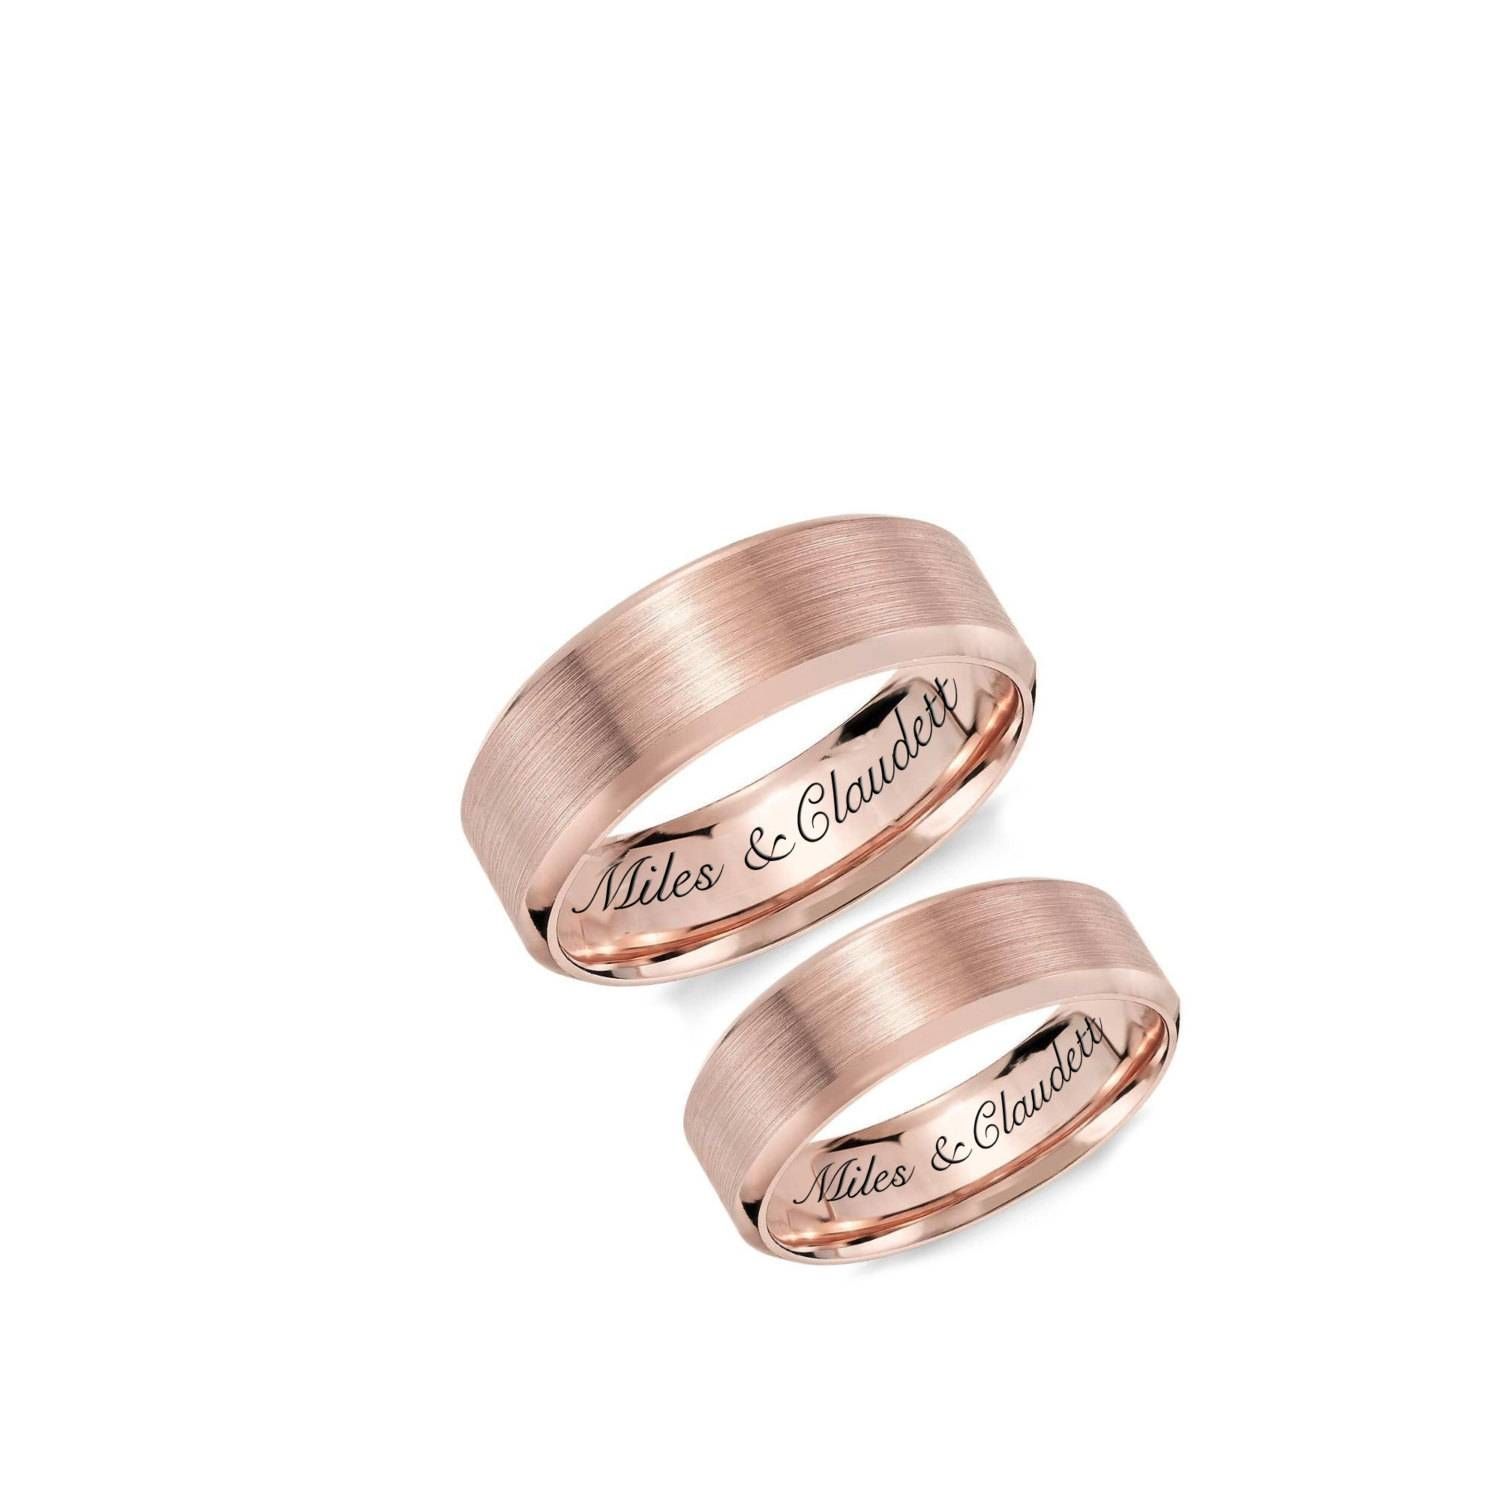 Personalized Rings Engraved Rings Rose Gold Ring Set With Latest Custom Anniversary Rings (View 10 of 25)